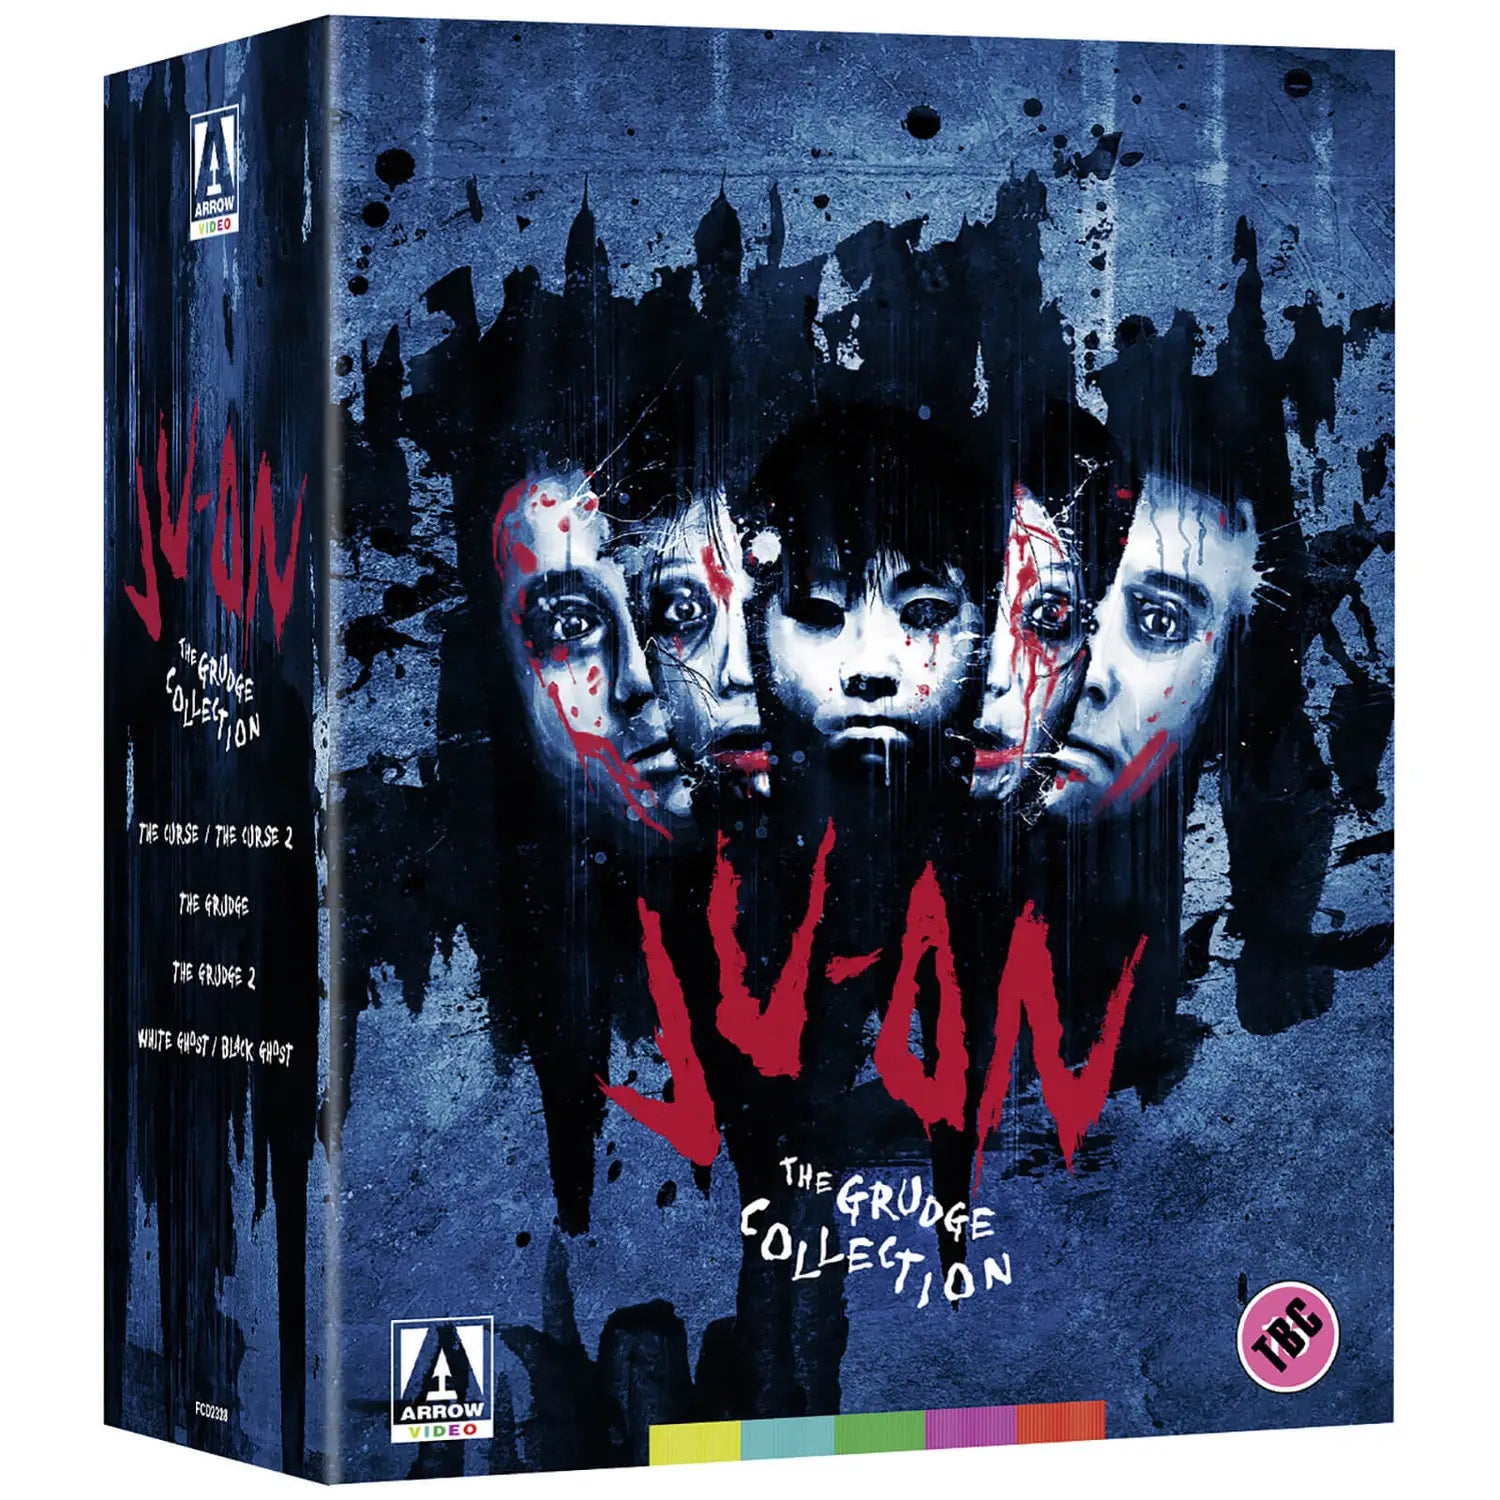 JU-ON: THE GRUDGE COLLECTION (REGION FREE/B IMPORT - LIMITED EDITION) 4K UHD/BLU-RAY [SCRATCH AND DENT]